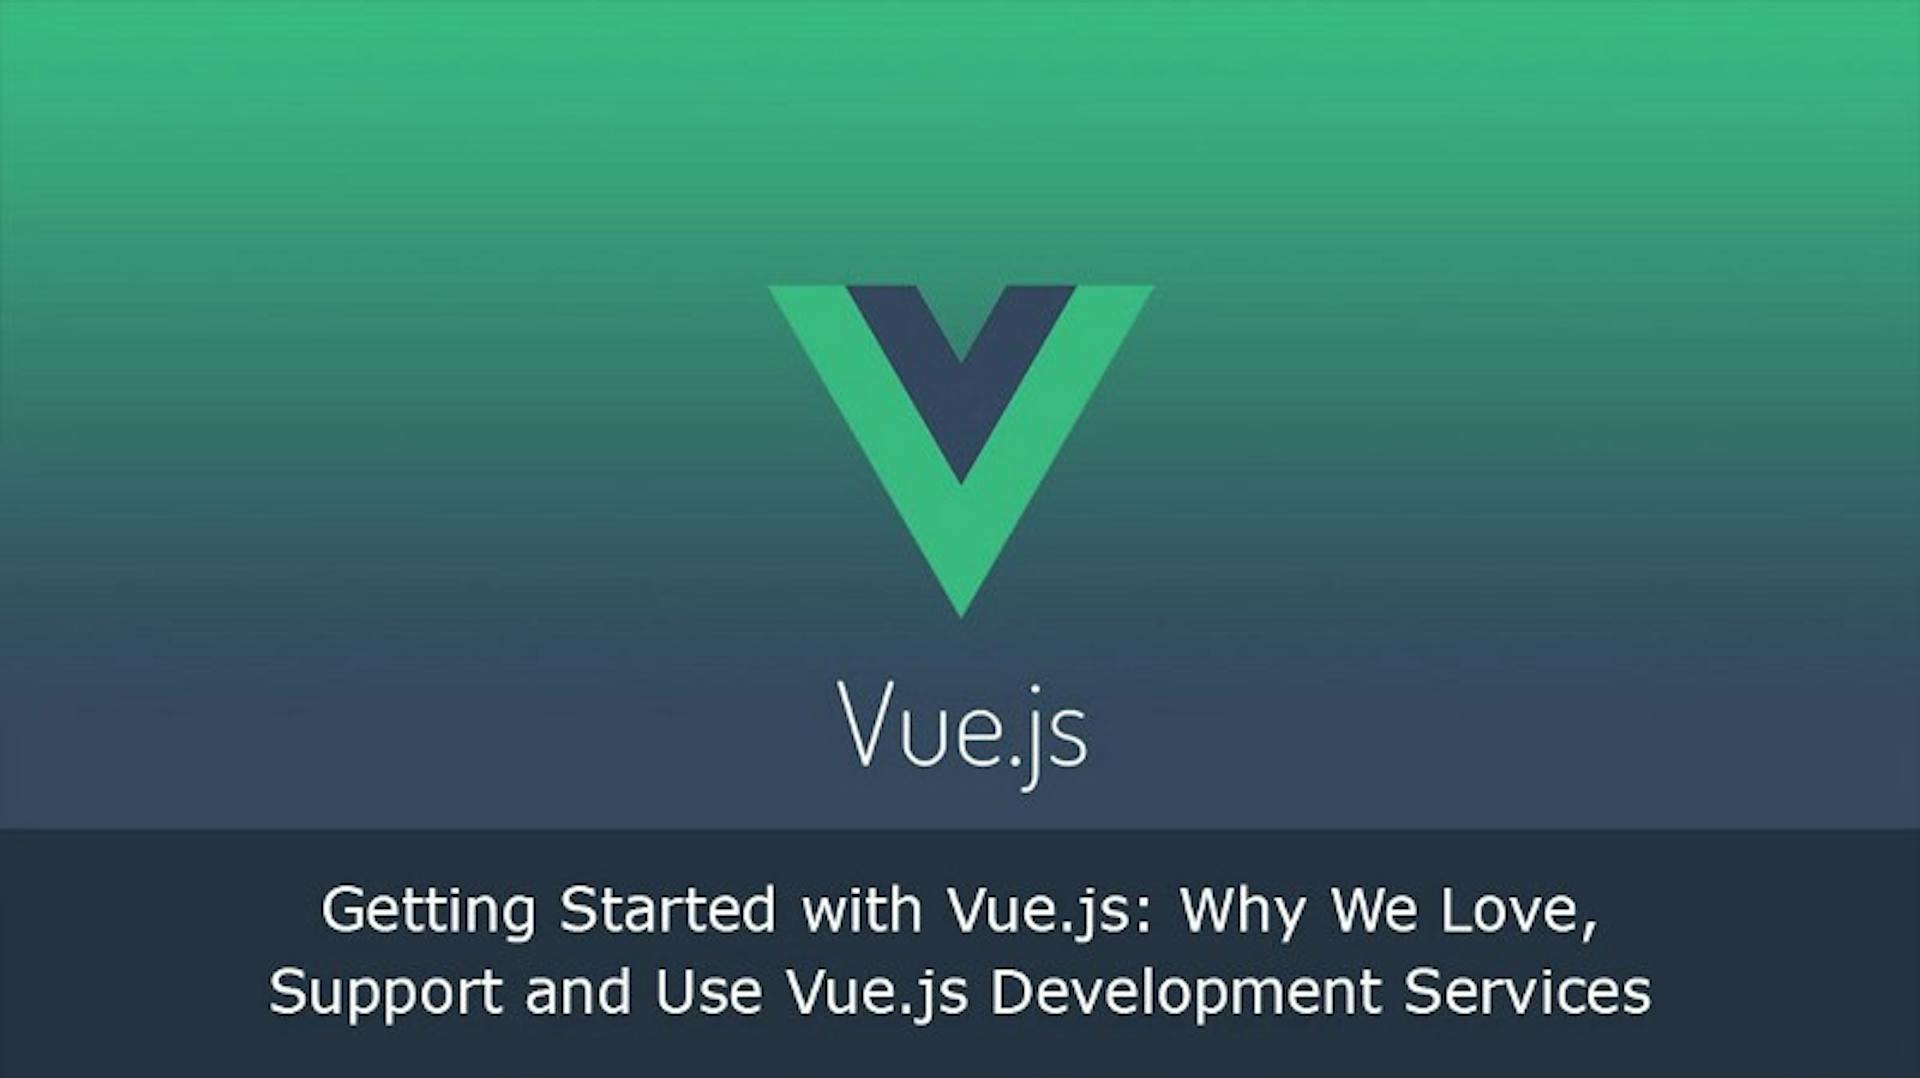 featured image - Getting Started with Vue.js: Why We Love, Support and Use Vue.js Development Services